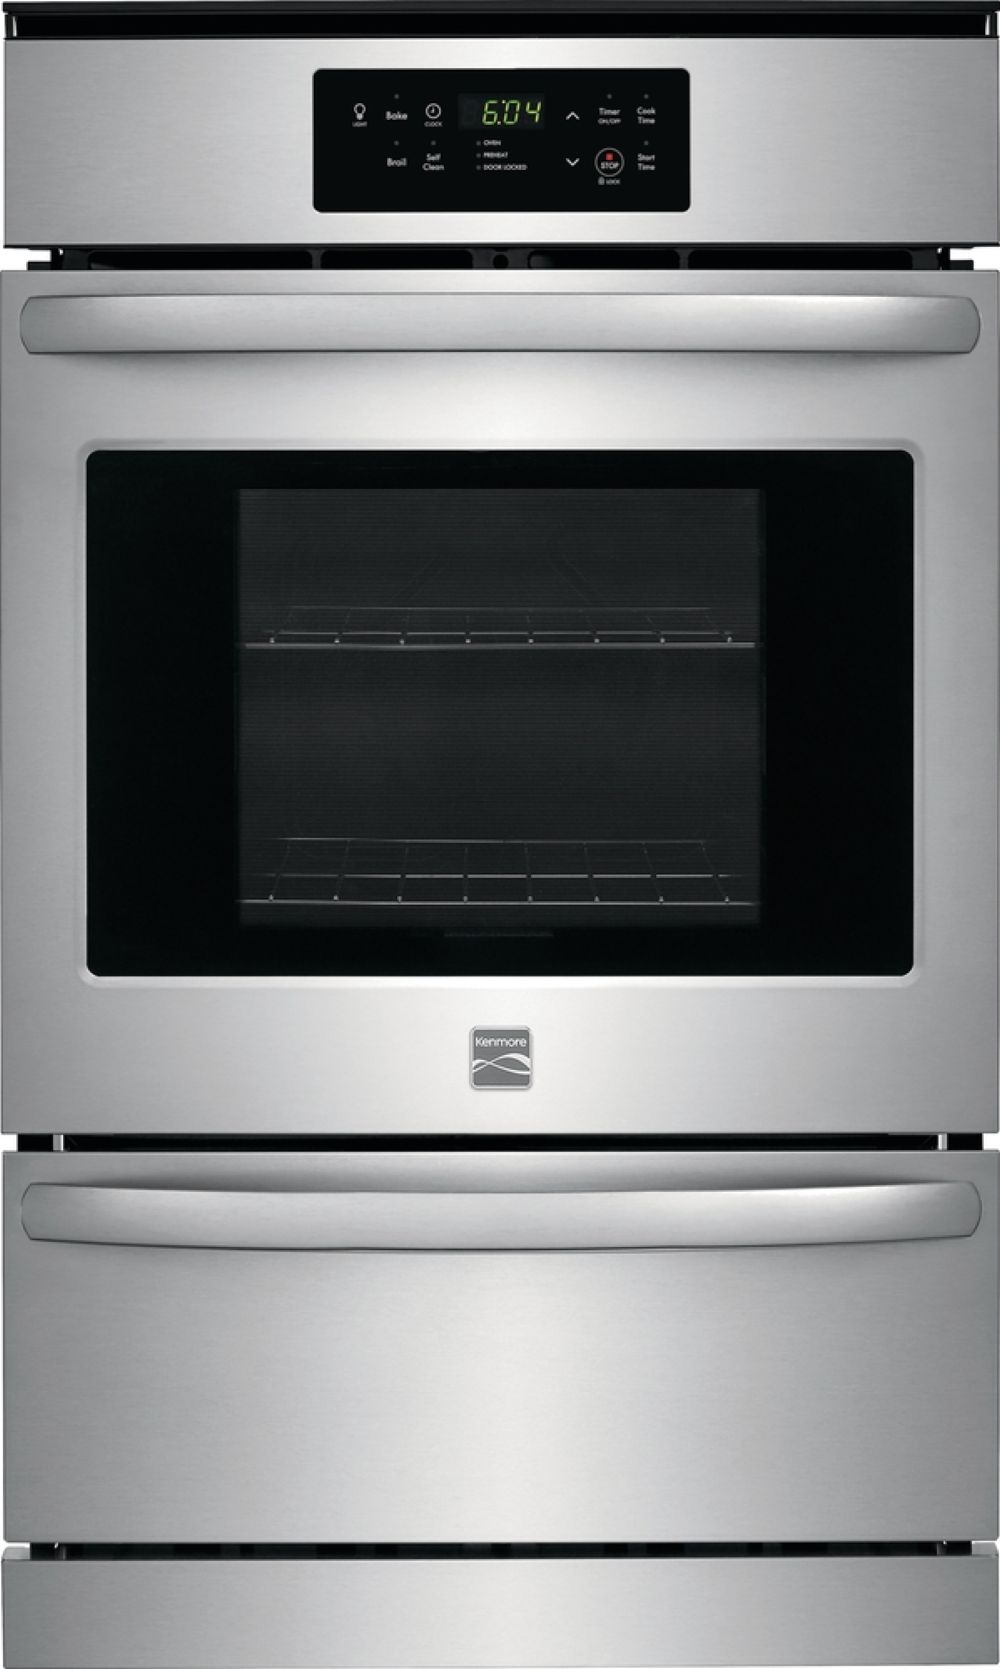 Kenmore 40413 24" Gas Wall Oven - Stainless Steel 24 Inch Gas Wall Oven Stainless Steel